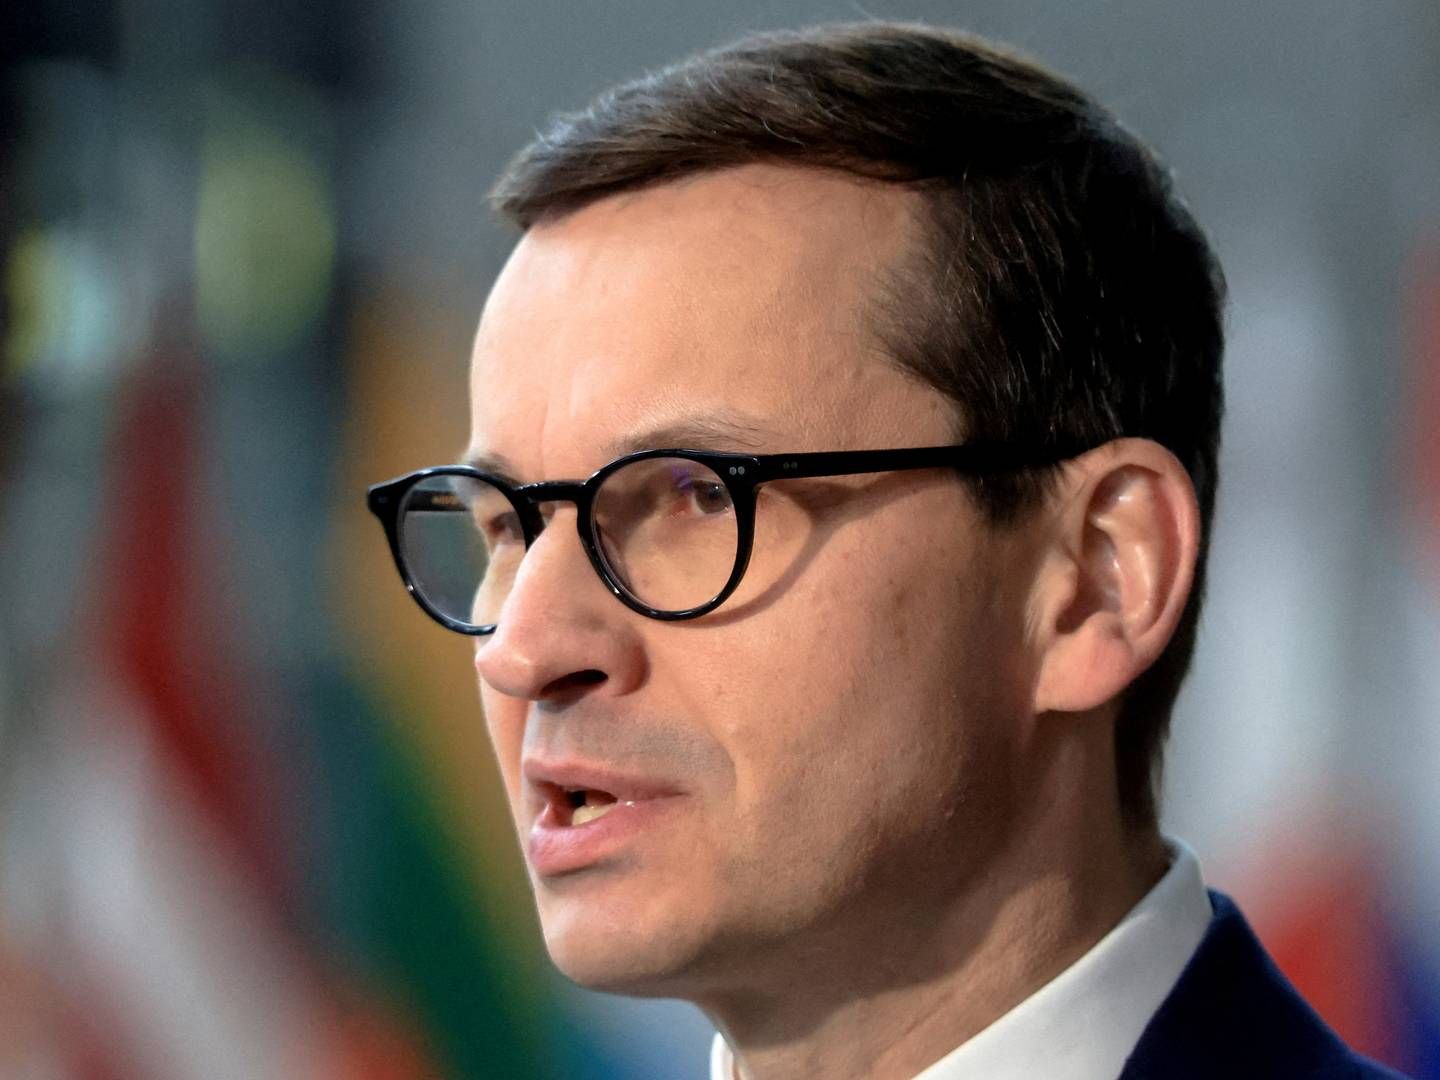 Polish Prime Minister Mateusz Morawiecki has informed that the nation's gas supplies are steady despite Russia's halting of gas flows. | Photo: Wolfgang Rattay/REUTERS / X00227